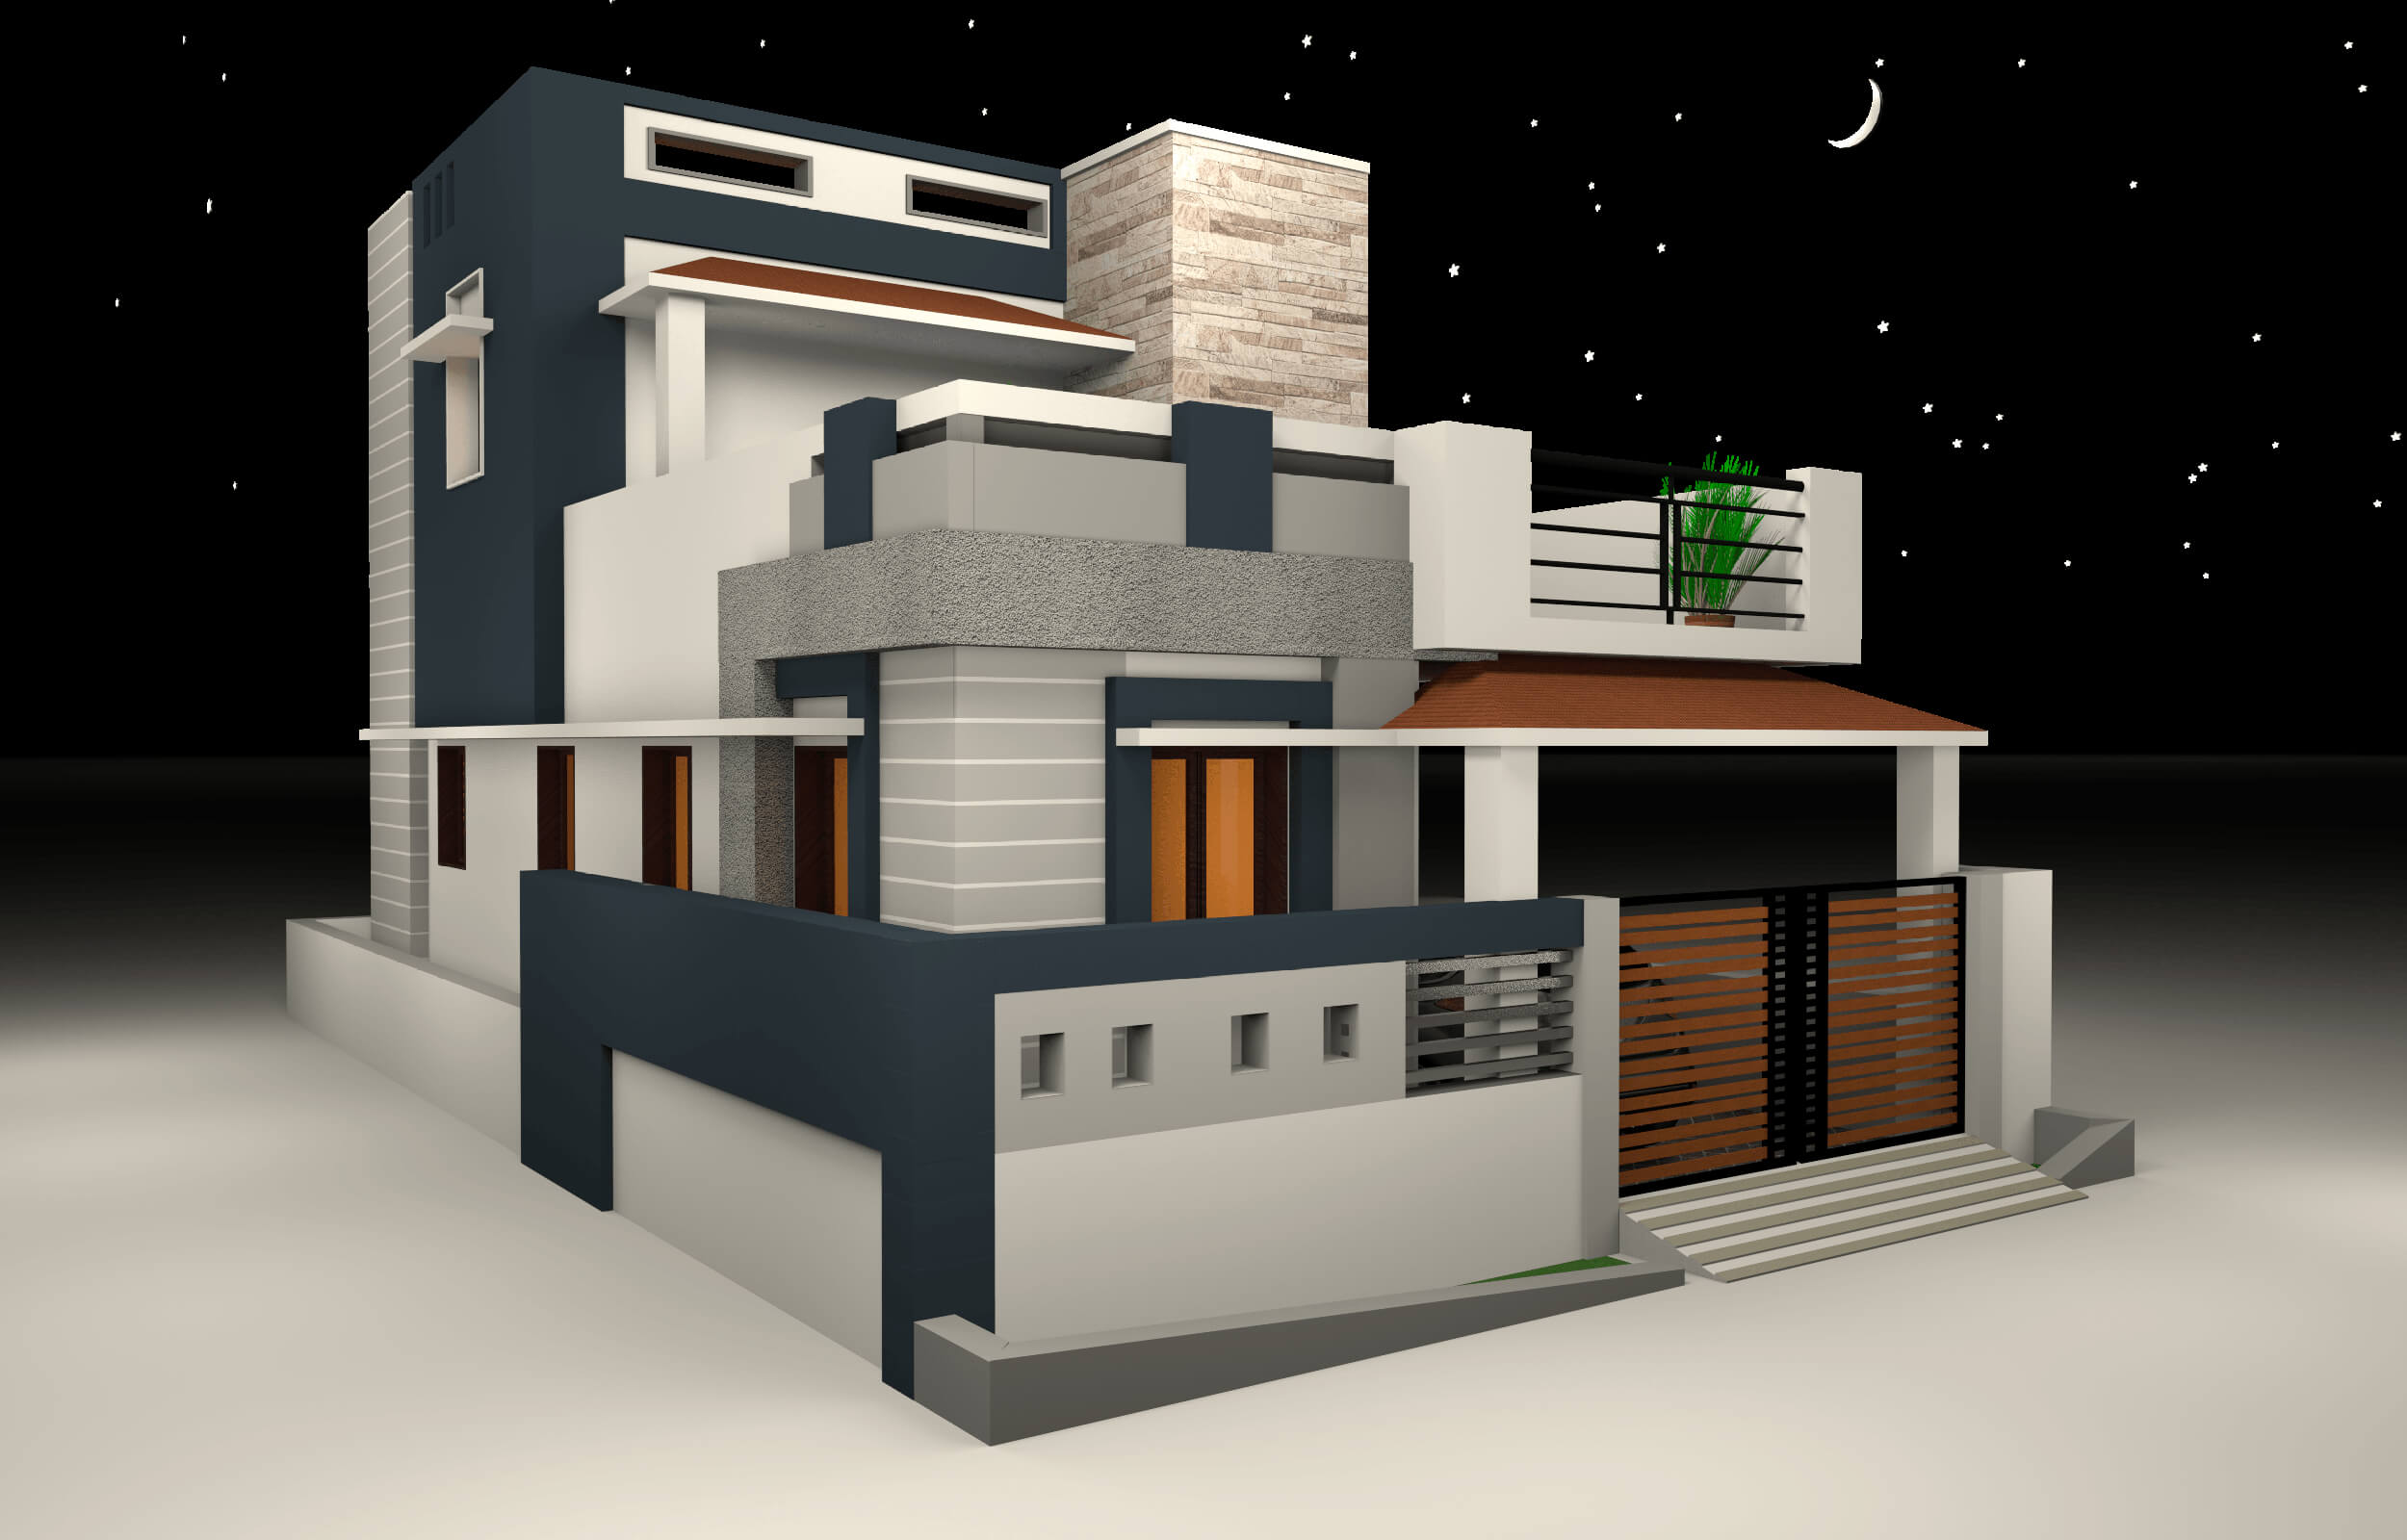 3d home design software free download full version for android